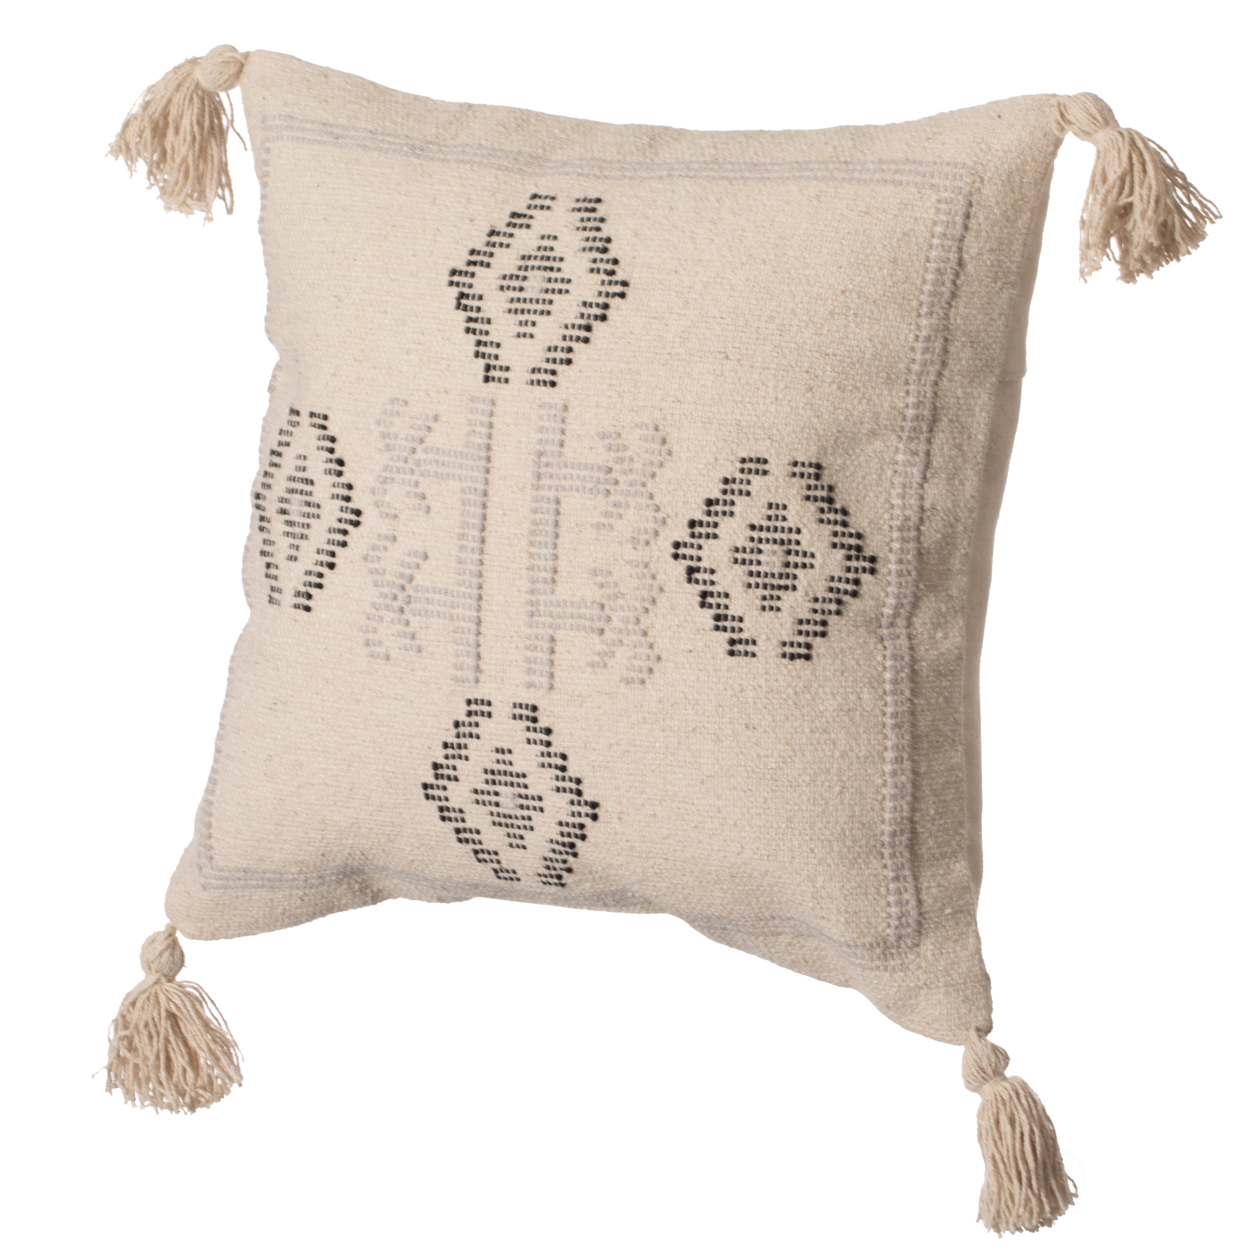 16 Handwoven Cotton Throw Pillow Cover With Tribal Aztec Design And Tassel Corners - Natural